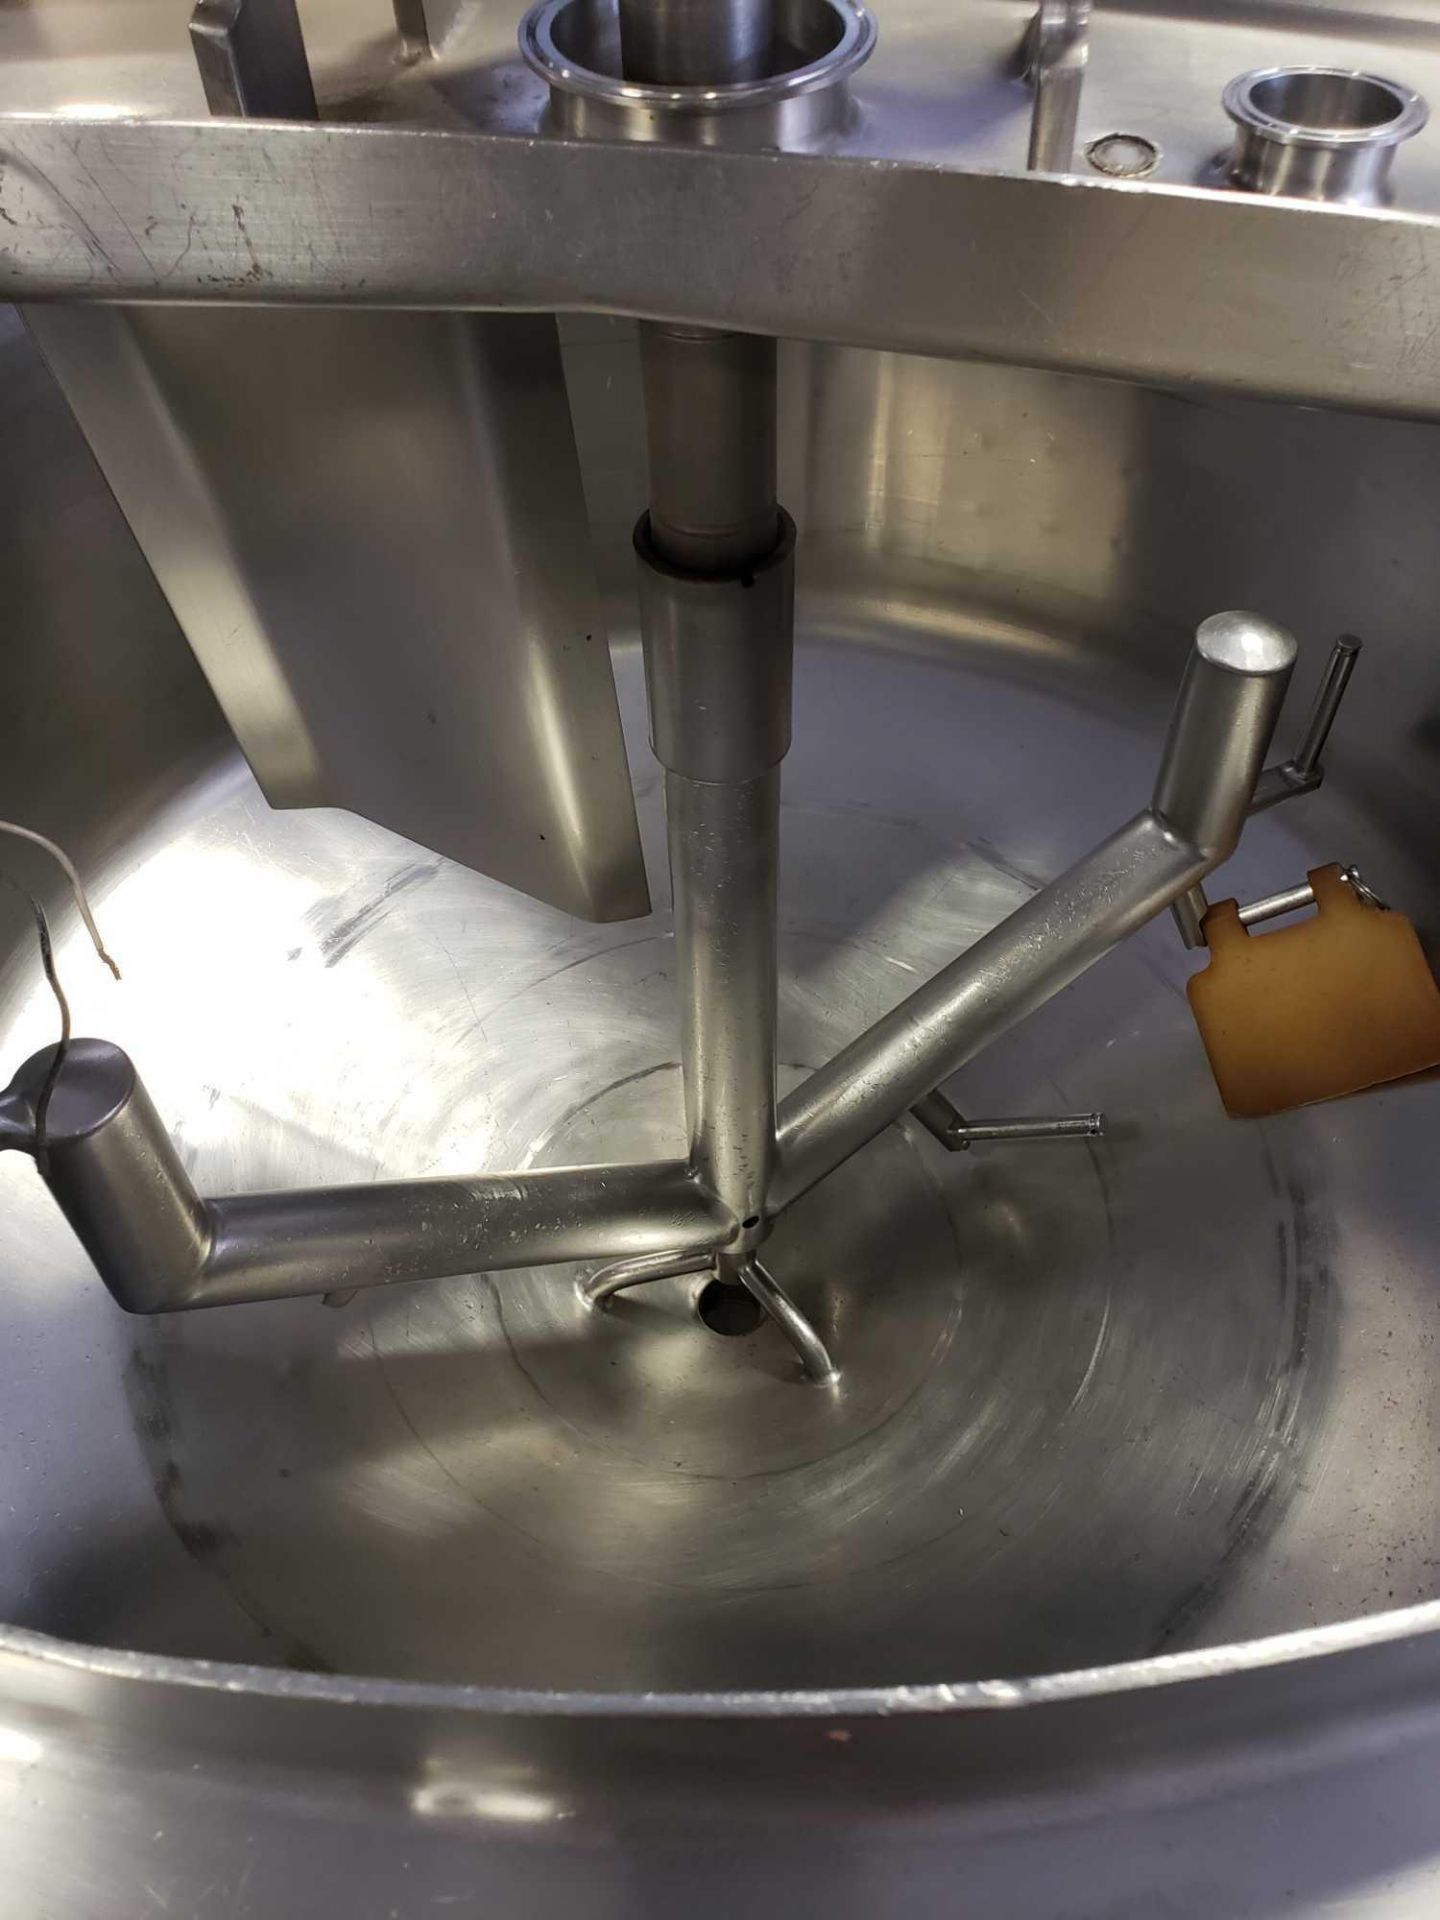 120 gallon Stainless steel jacketed mixer kettle, 48" diameter, 33" interior depth, 2010 model year. - Image 12 of 13